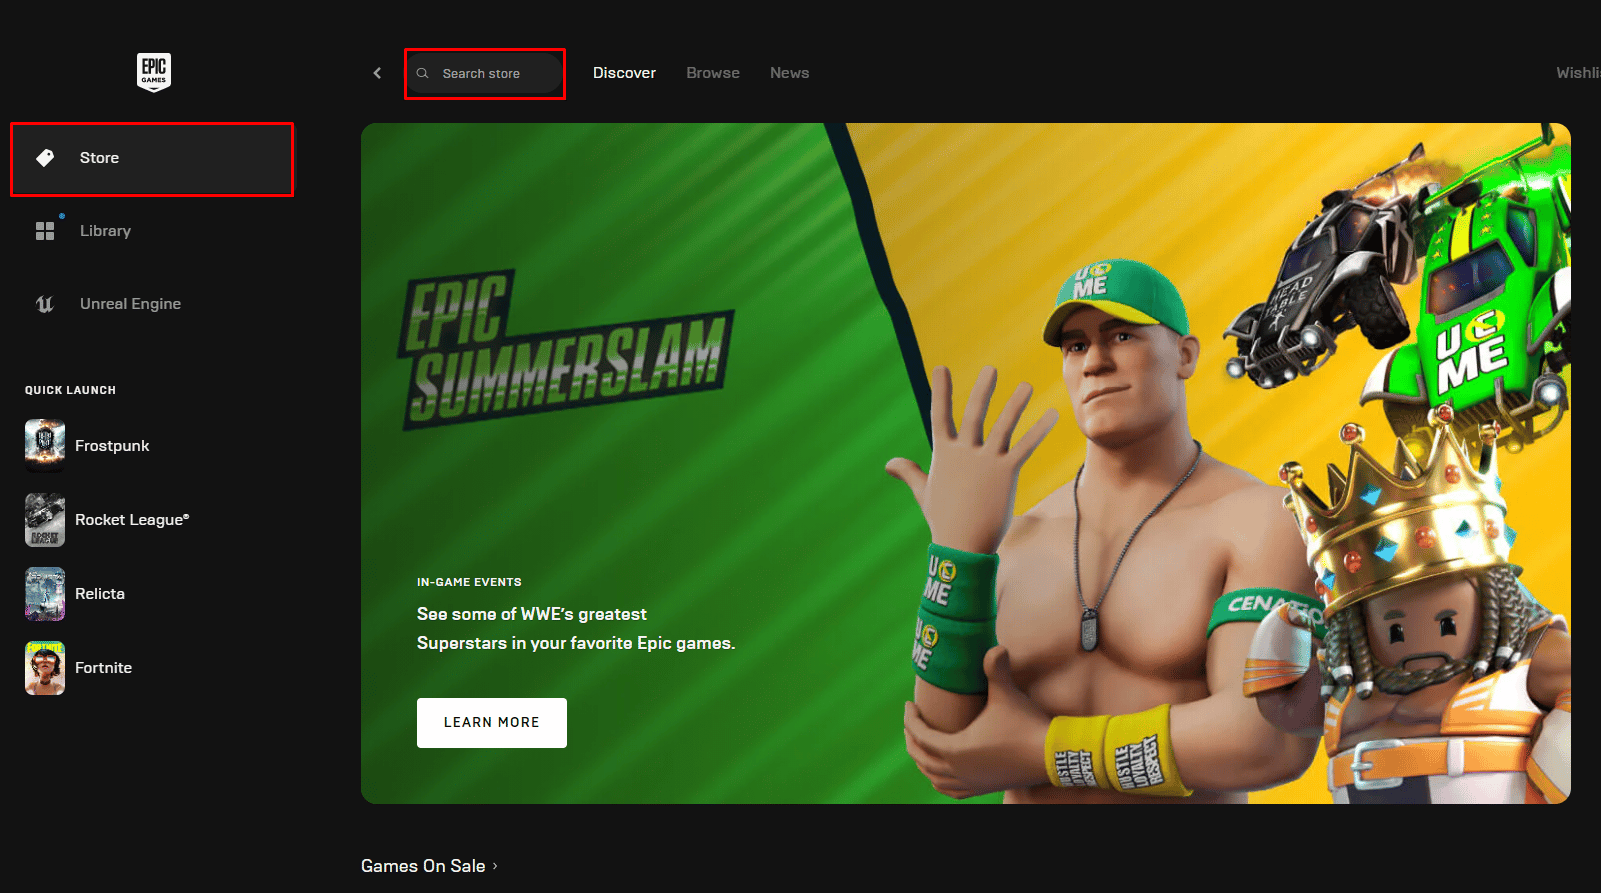 Go to the Epic Games Store and search for Fortnite